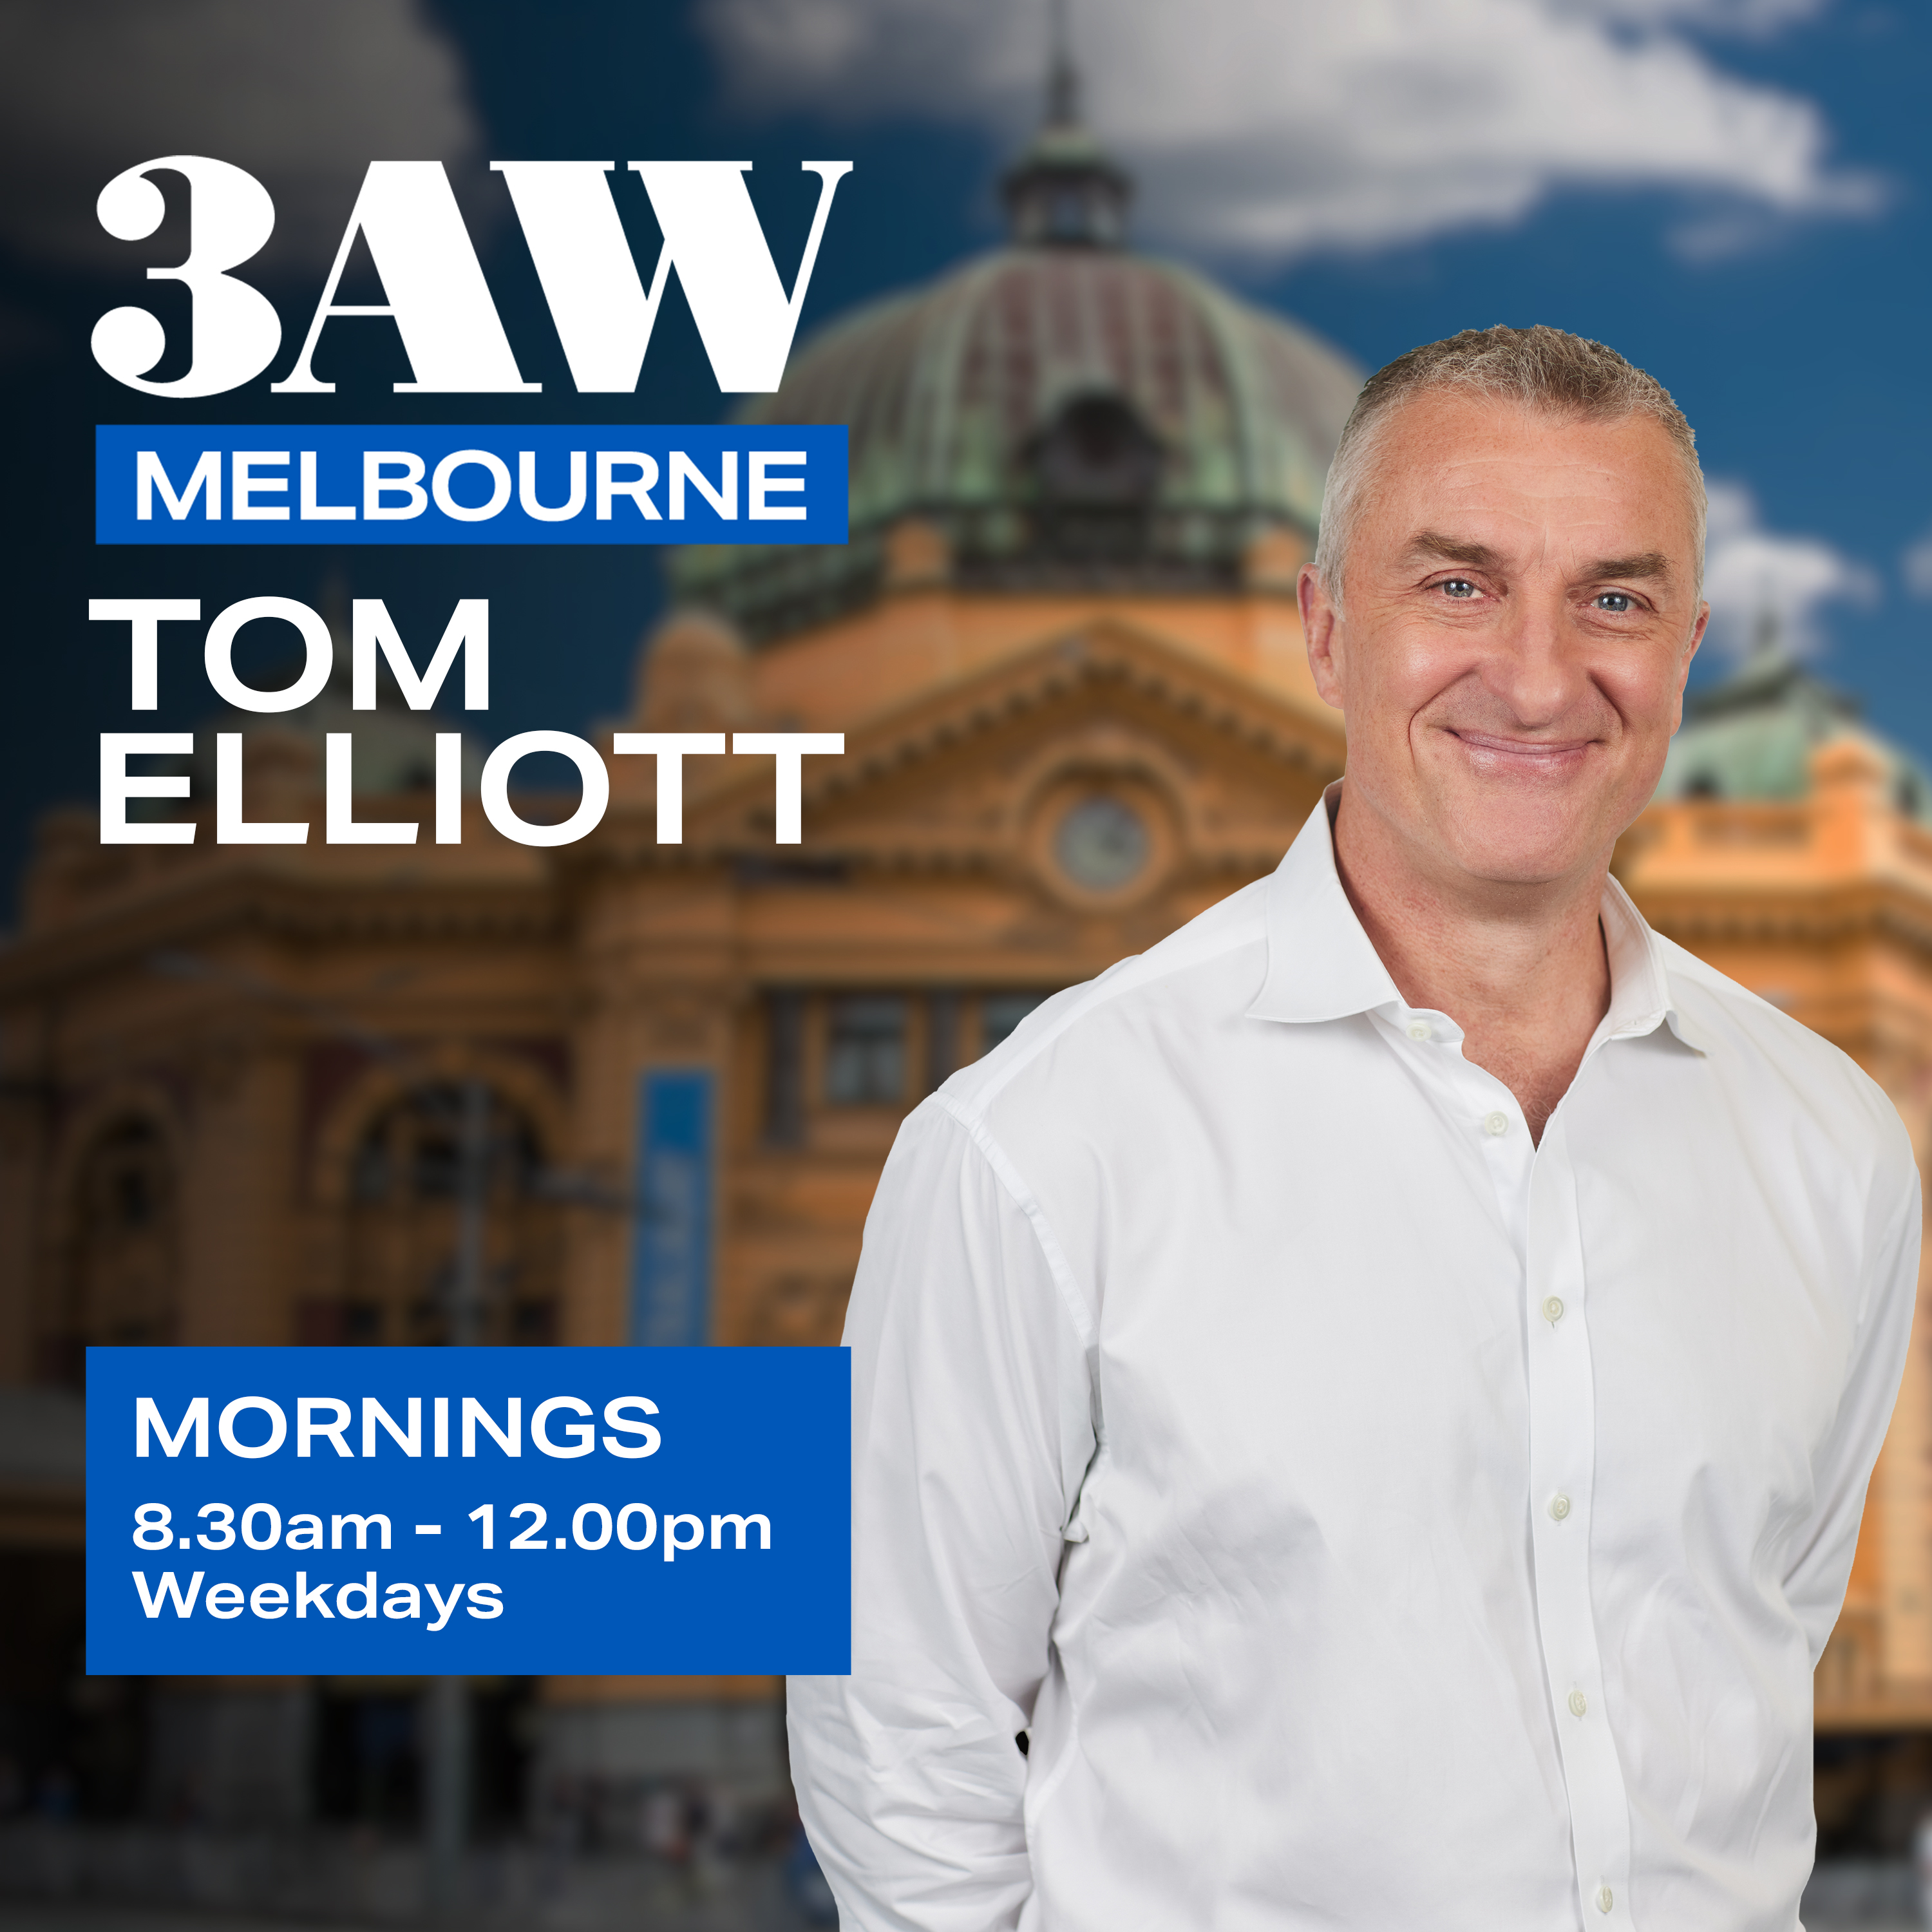 Tom Elliott's heated clash with 'Teachers for Palestine' spokesperson over Anzac Day protest